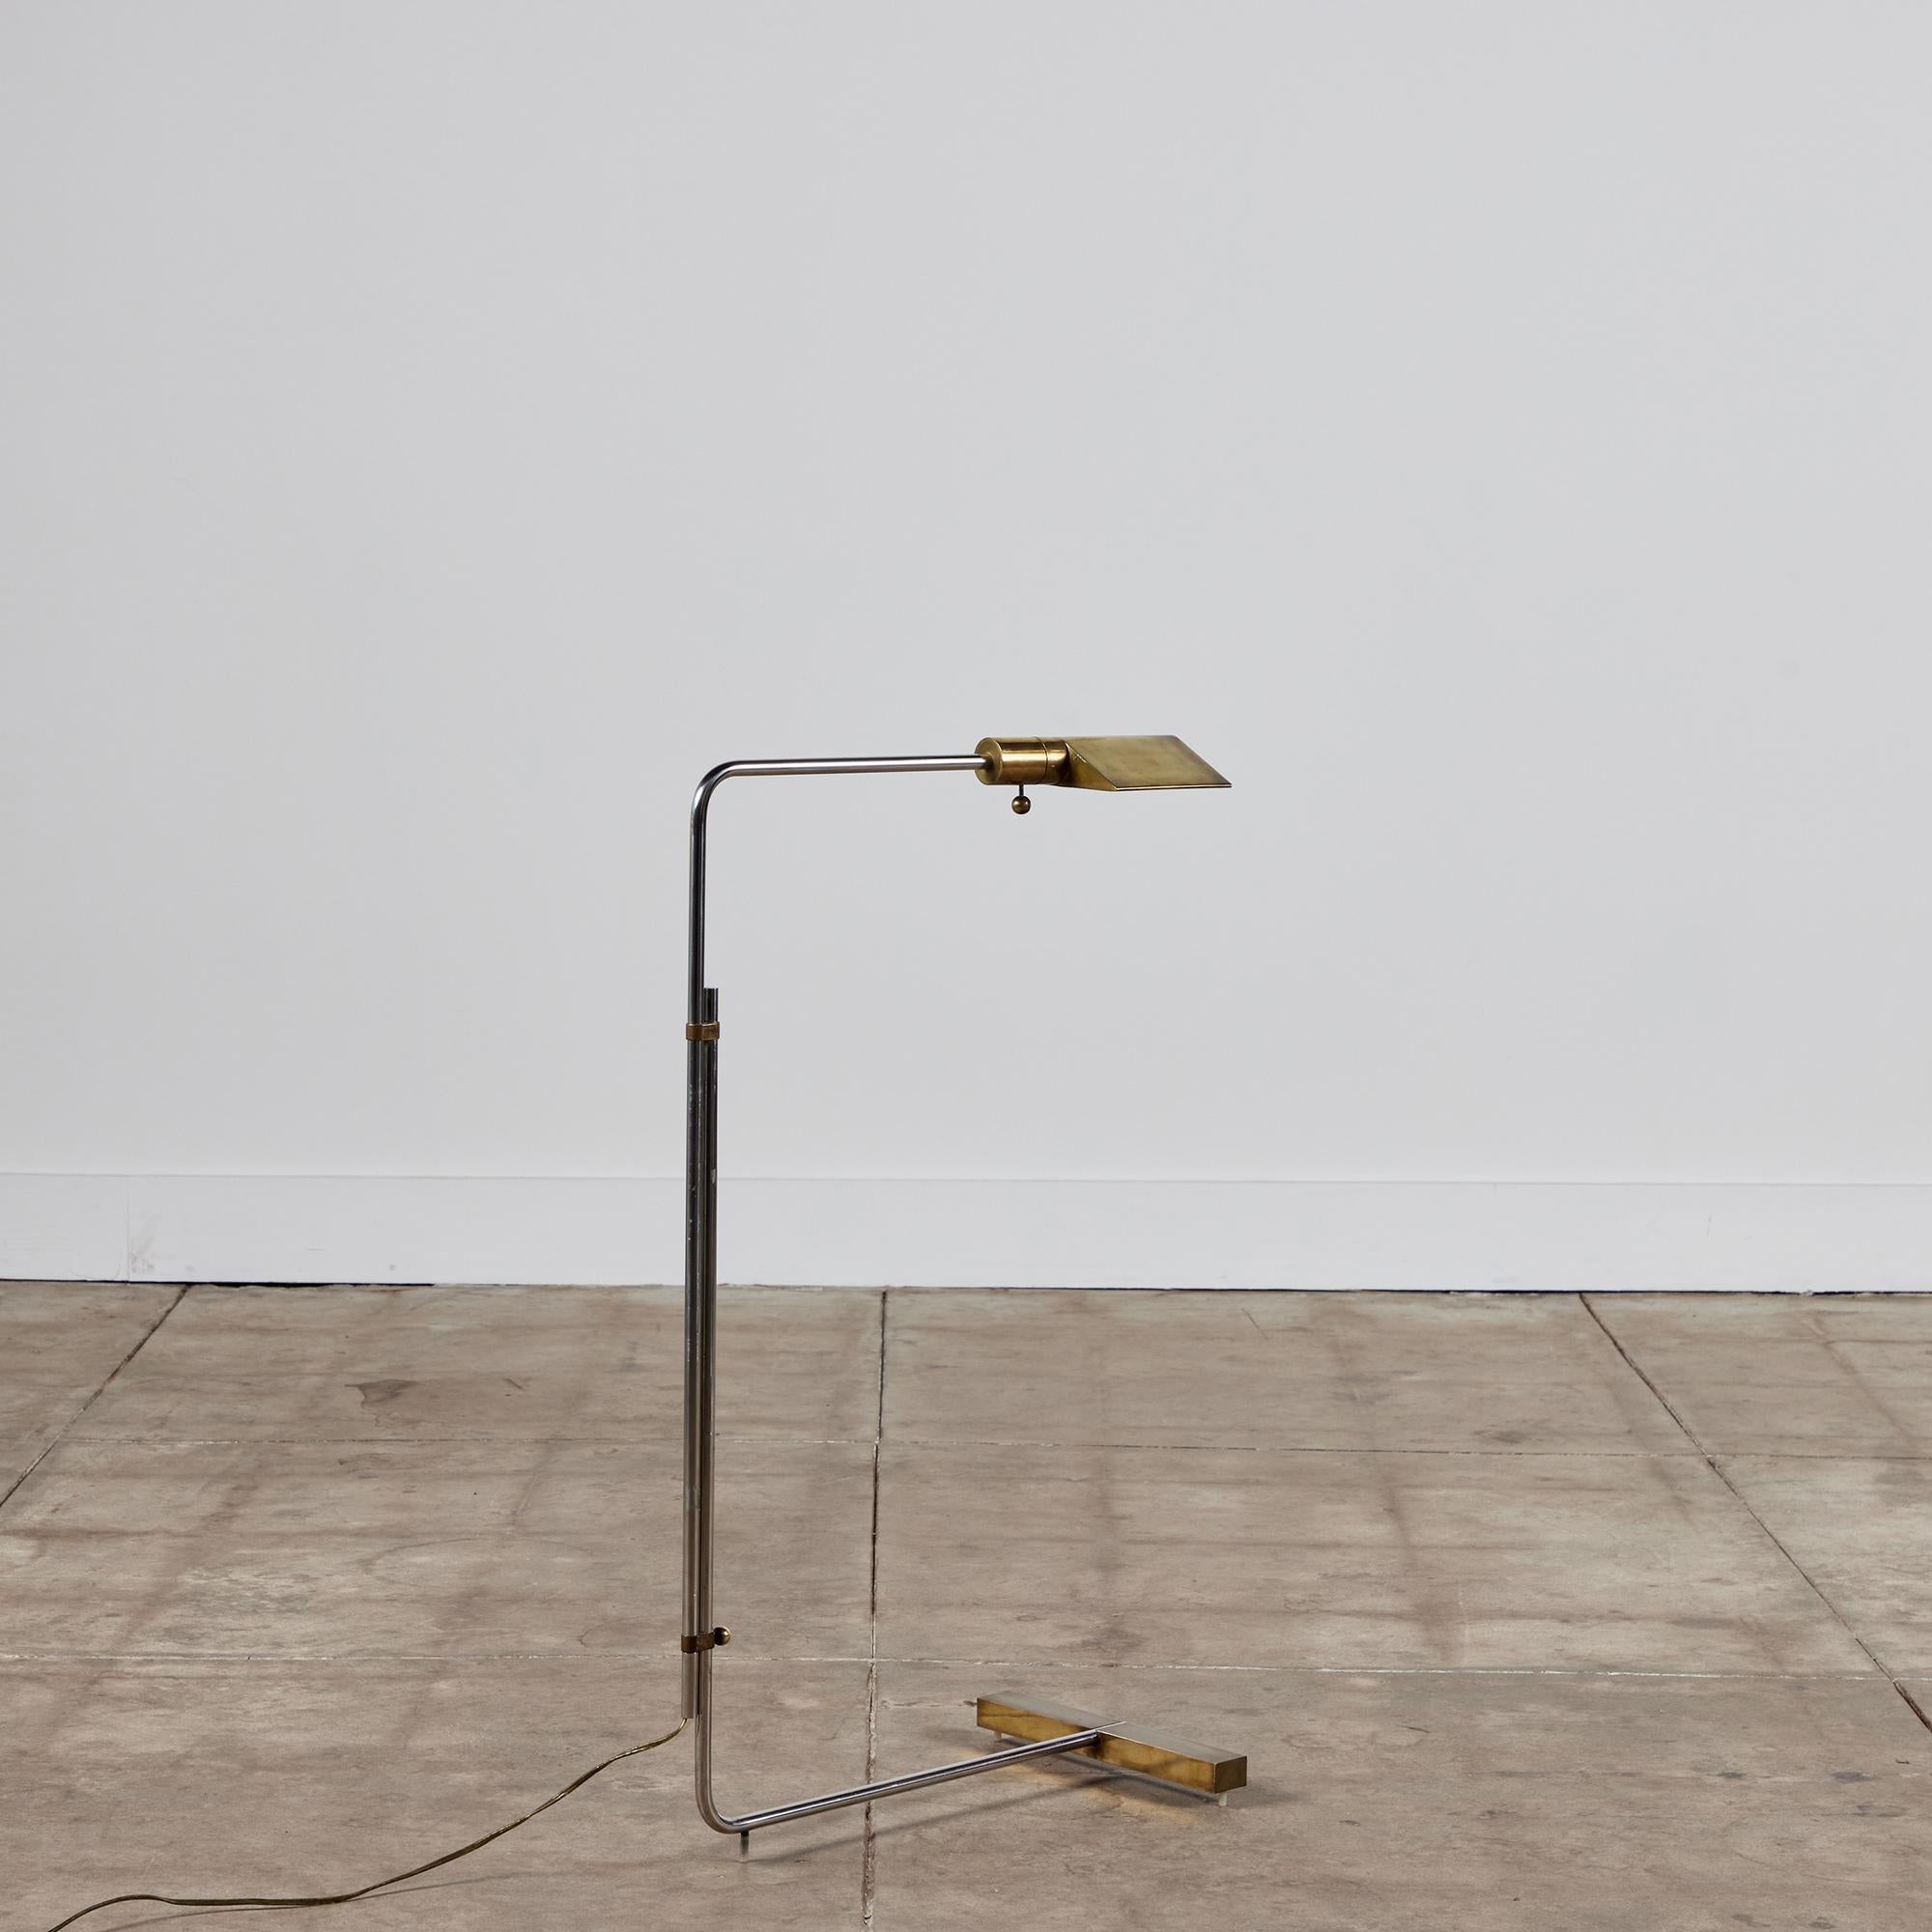 Designed in the 1970s, this brass and stainless steel floor lamp by Cedric Hartman is an enduring design Classic. The modernist floor lamp features a triangular brass shade attached to two curved parallel stainless steel stems that offer focused